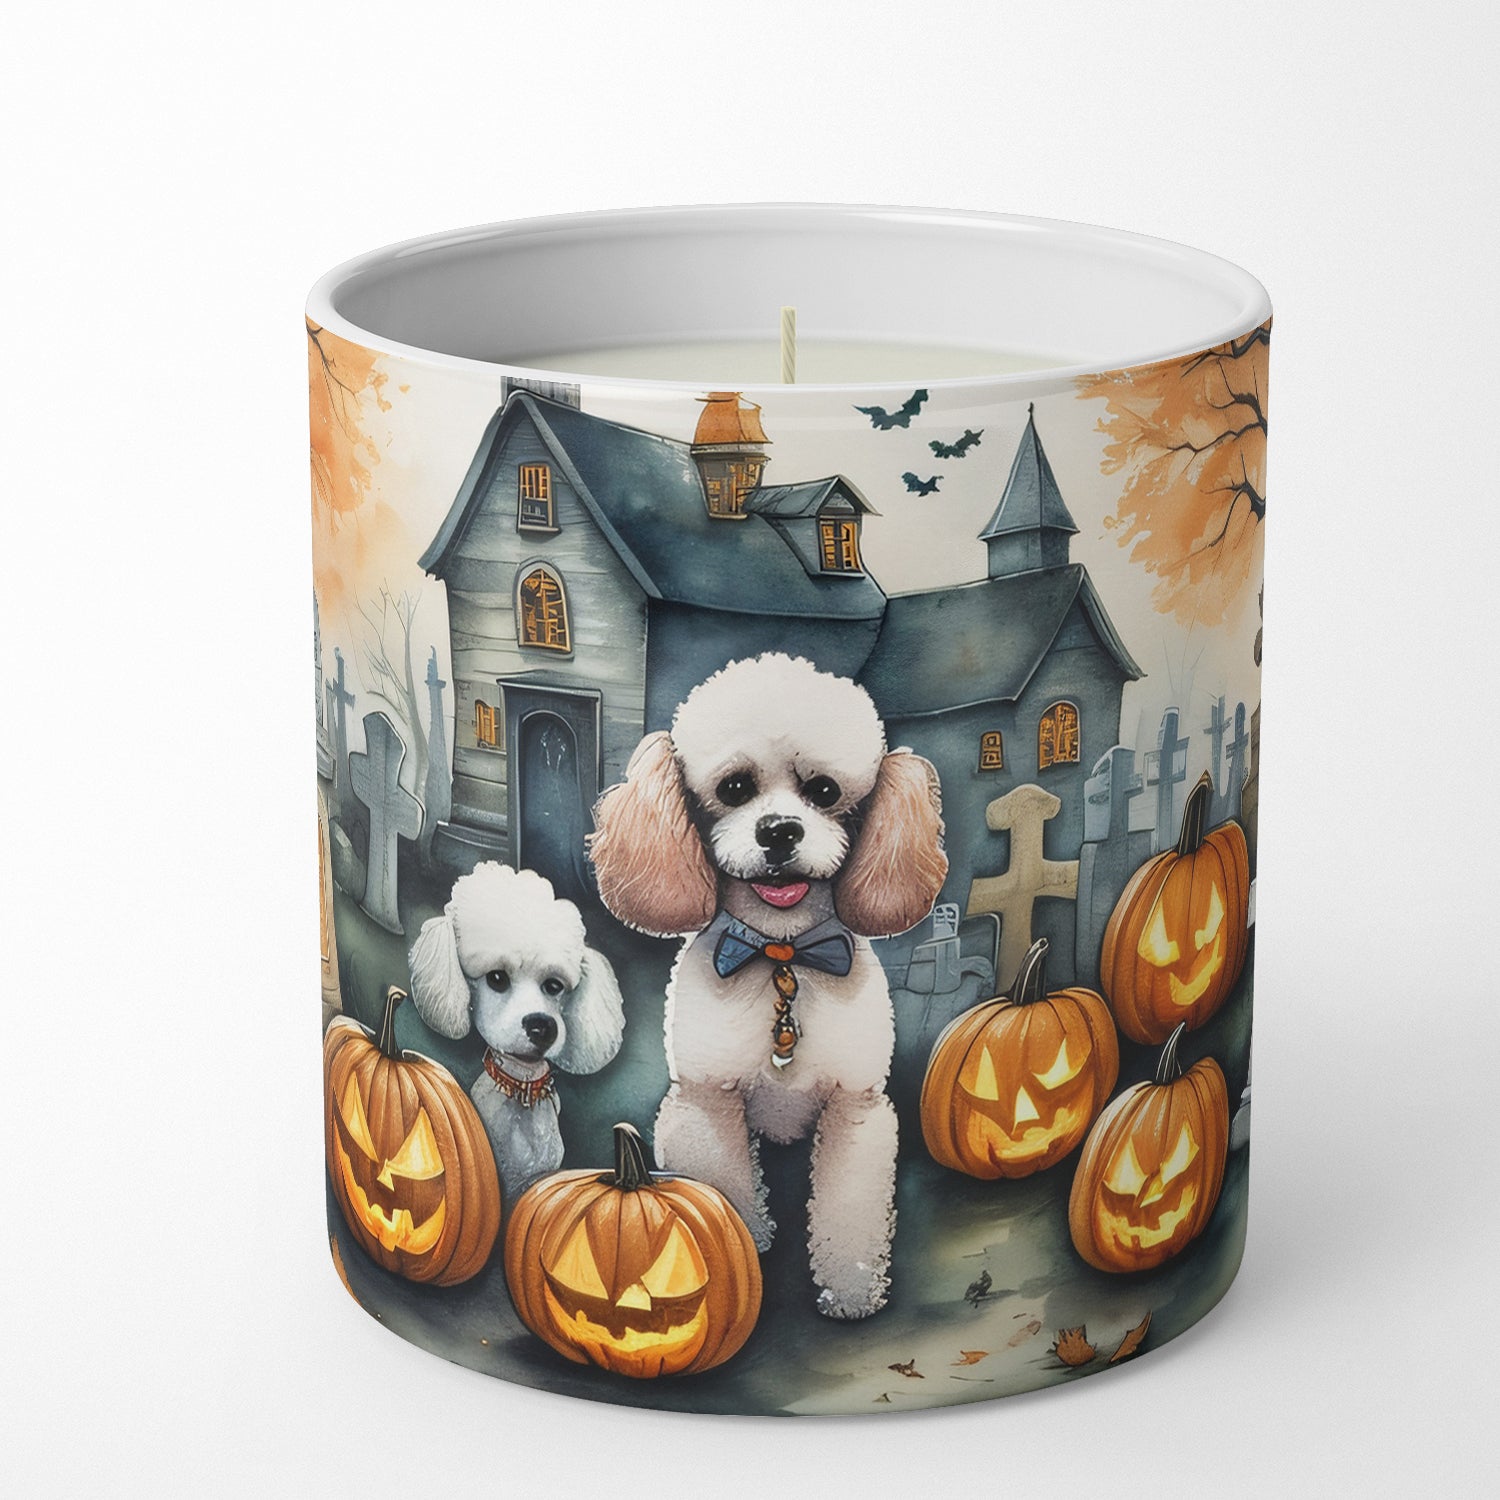 Buy this Poodle Spooky Halloween Decorative Soy Candle